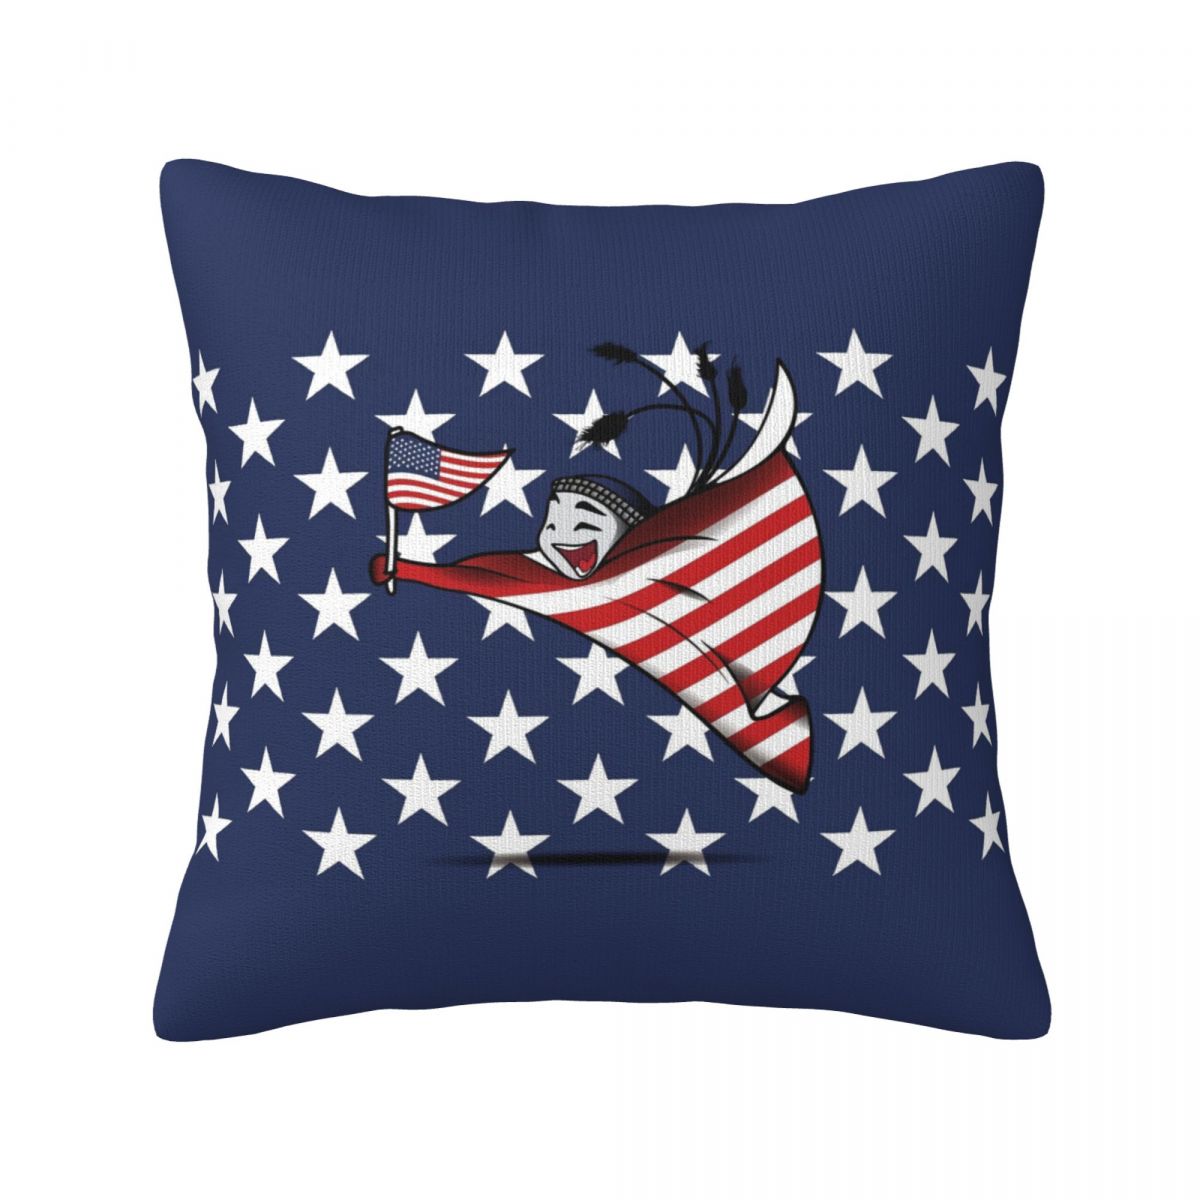 United States World Cup 2022 Mascot Throw Pillow Covers 18x18